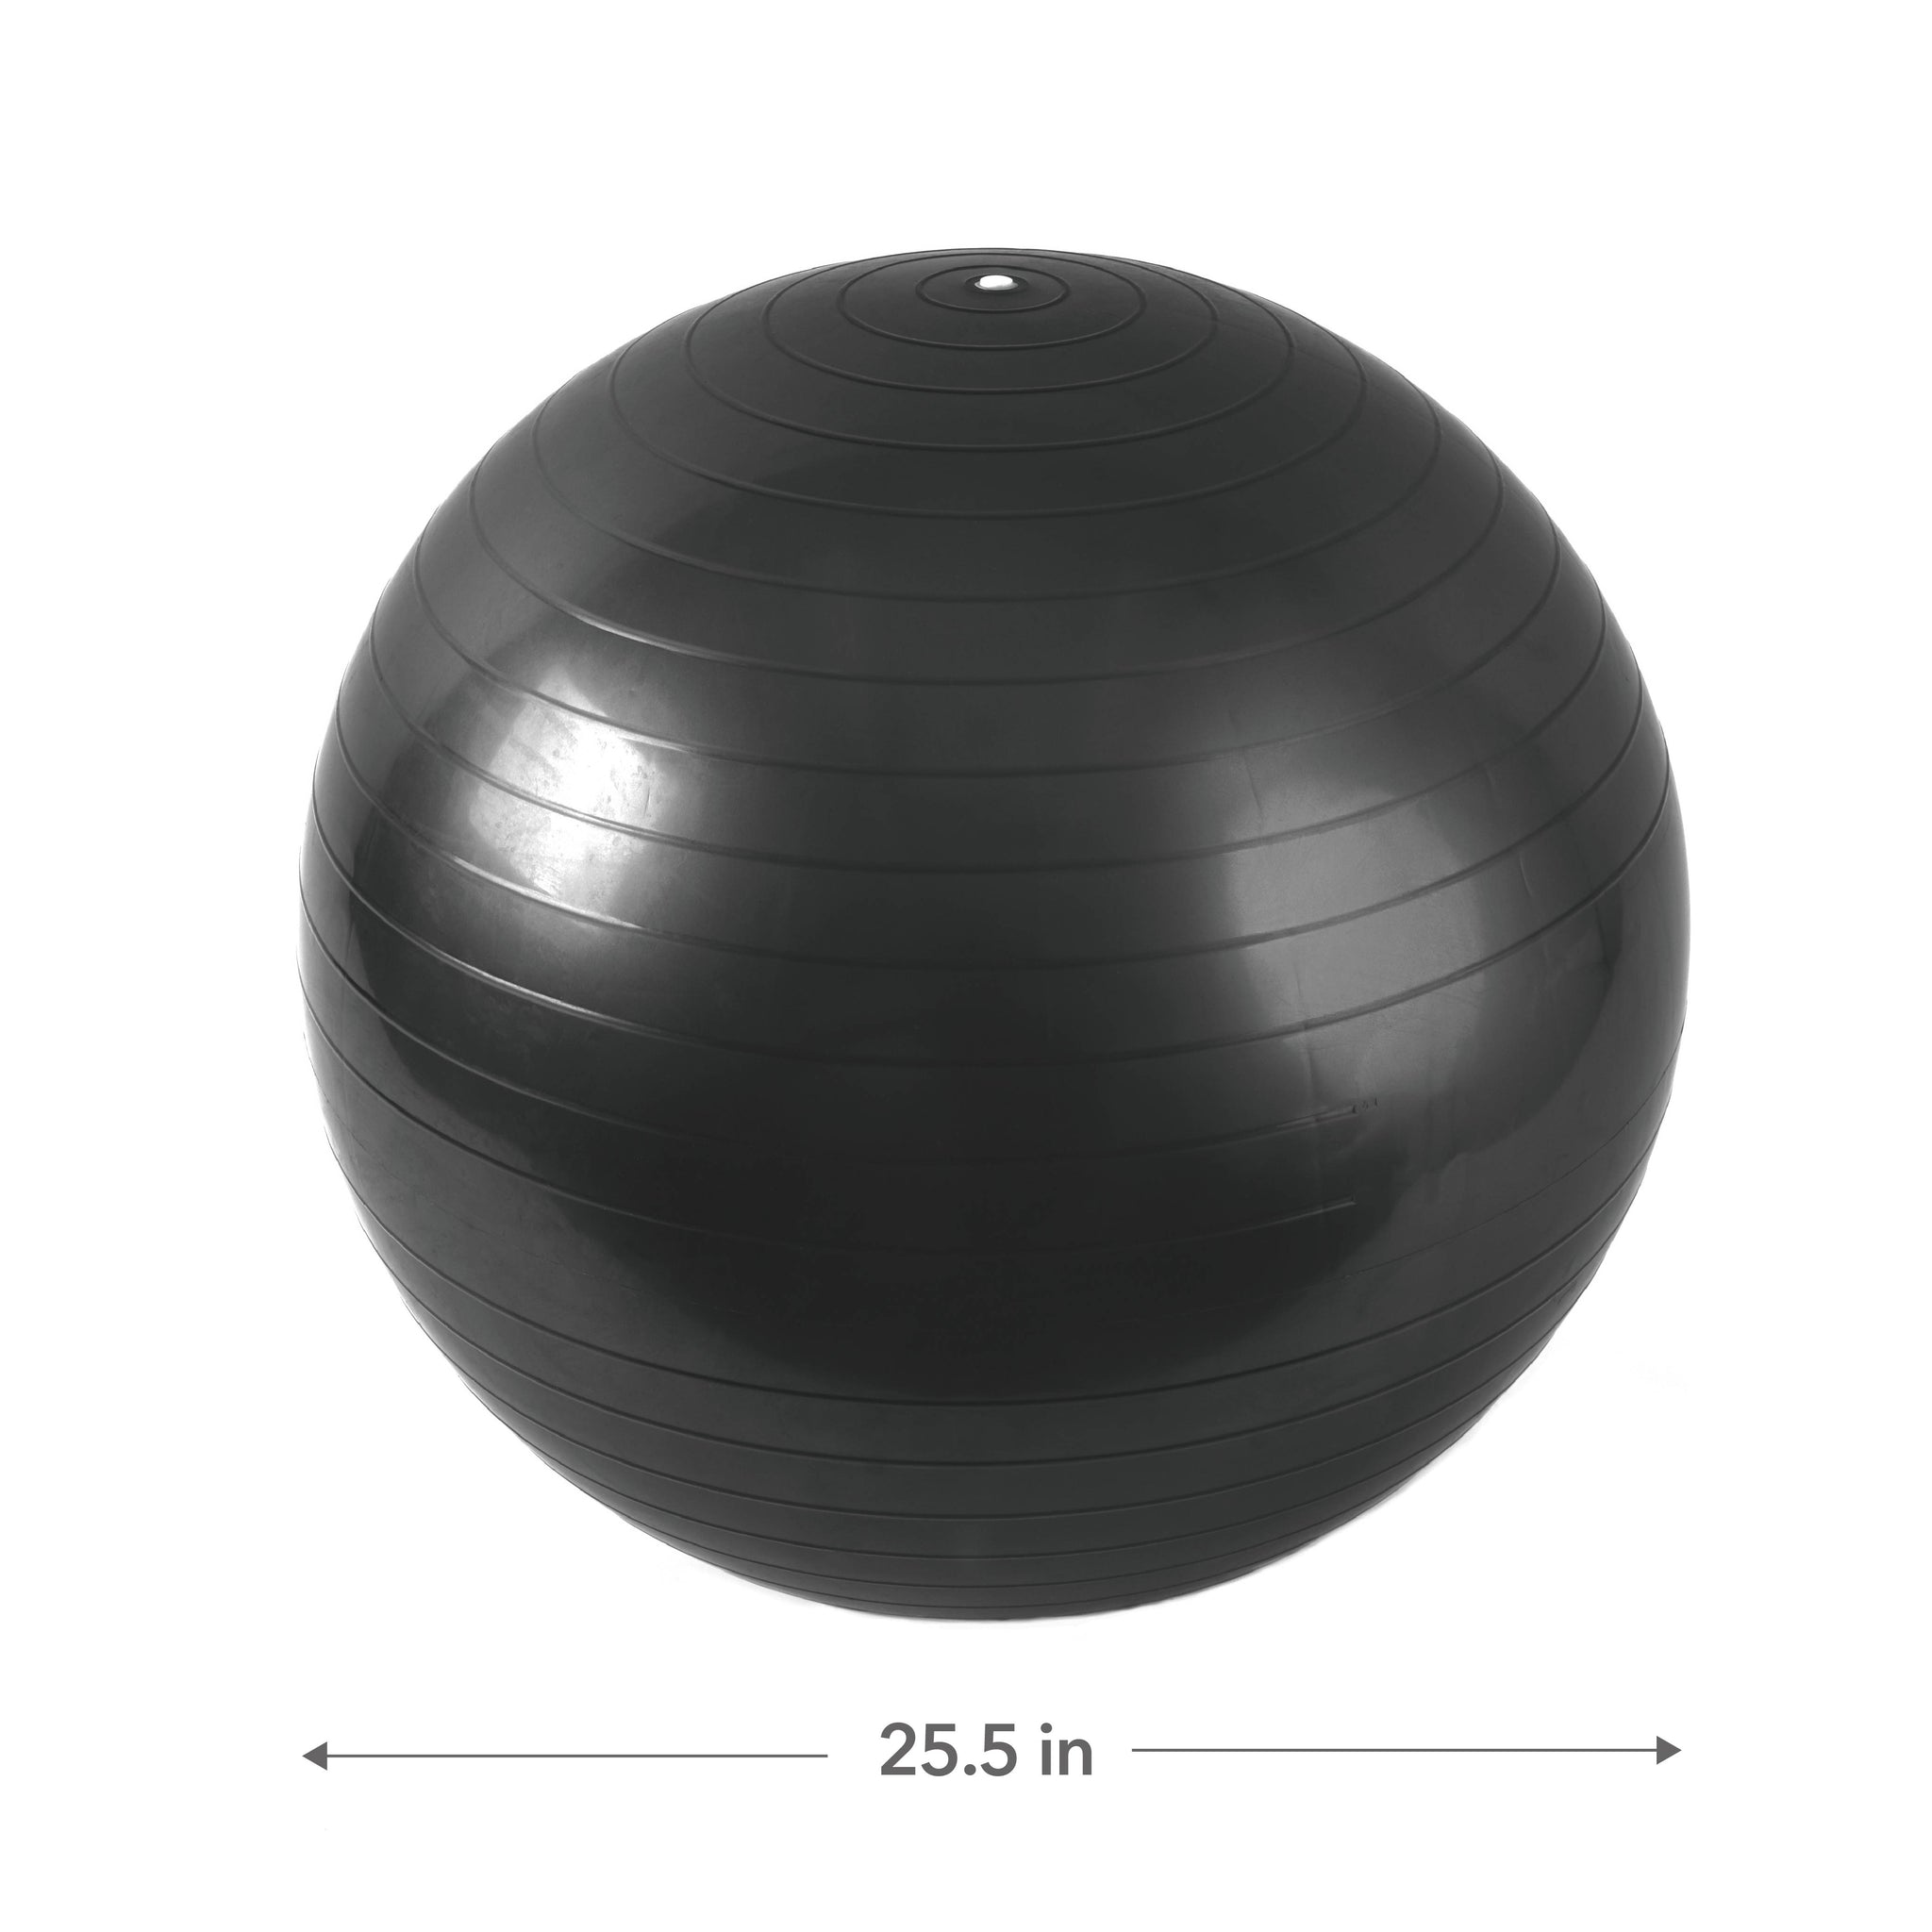 FitBeast 75cm Yoga Ball for Home, Office, or Relaxation - Black